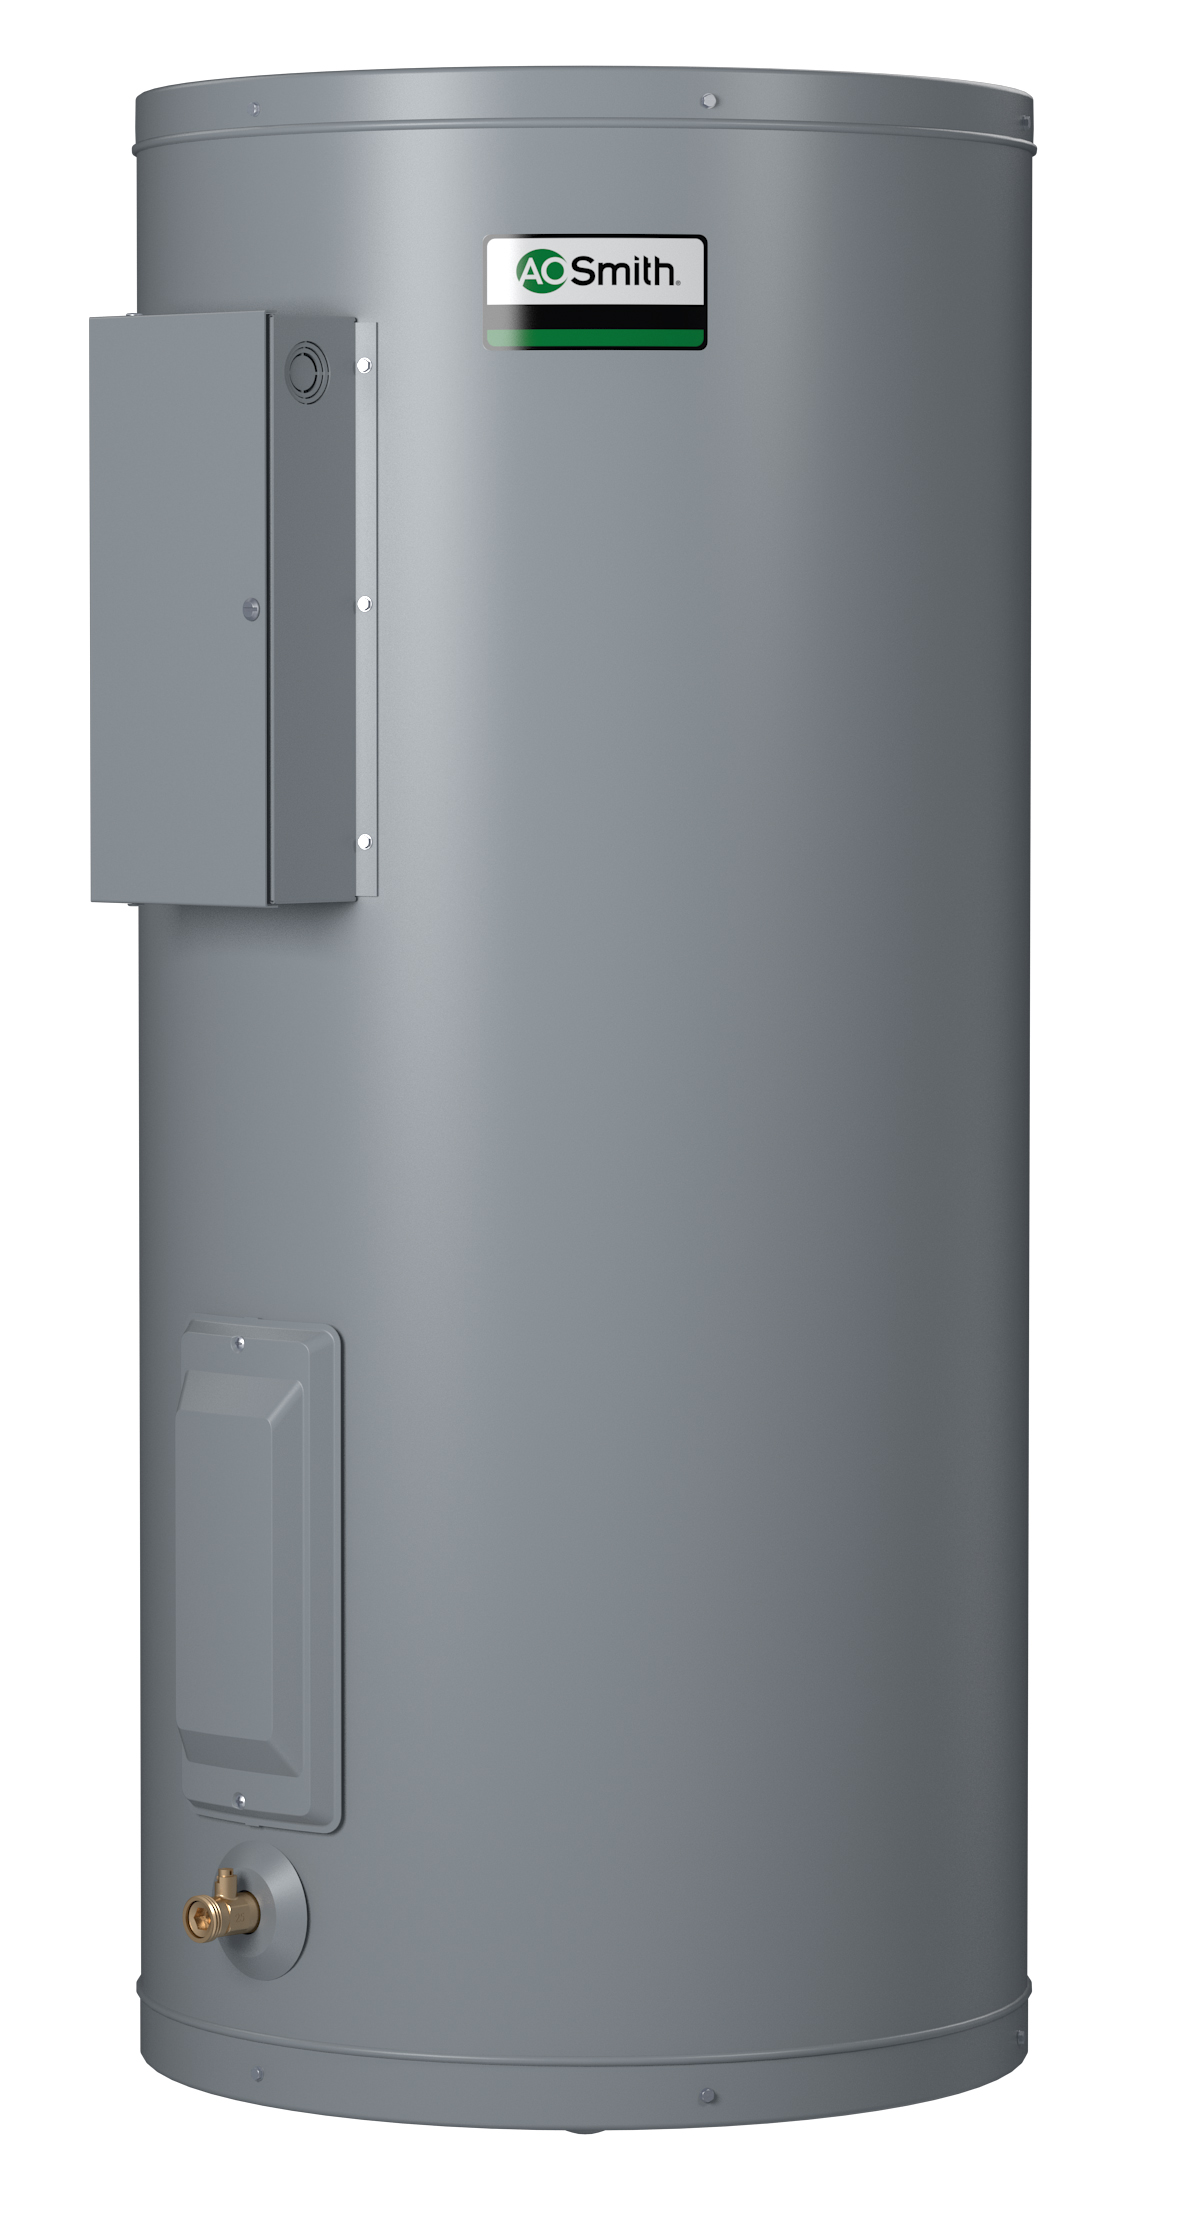 AO SMITH DEL-30D:36 GALLONS, 10.0KW, 208 VOLT, 3 PHASE, (2-5000 WATT ELEMENTS, SIMULTANEOUS WIRING), DURA-POWER, LIGHT DUTY COMMERCIAL ELECTRIC WATER HEATER